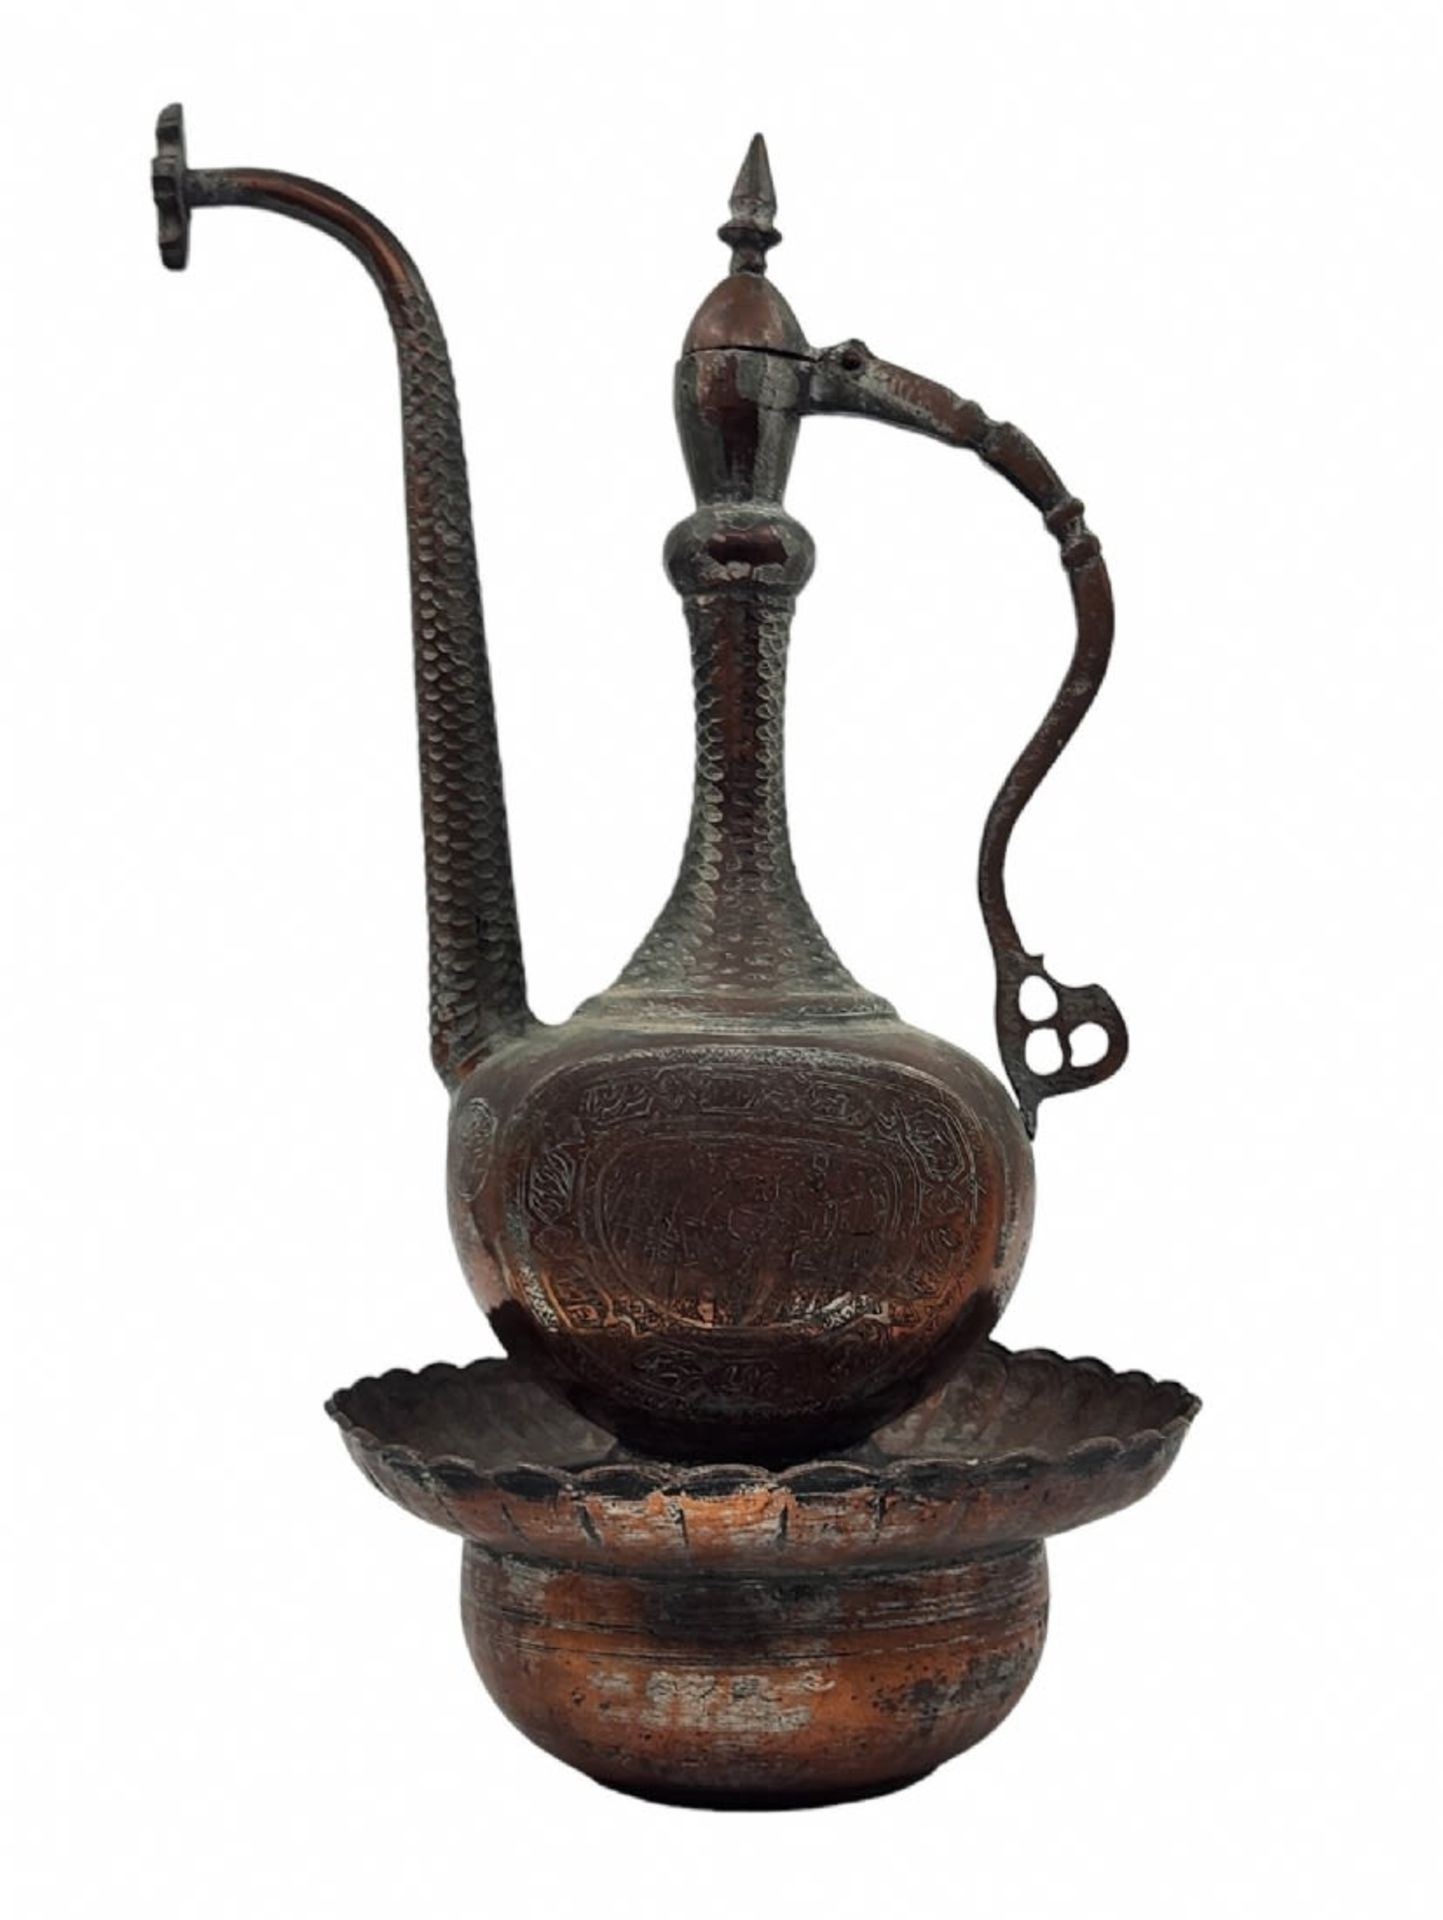 An antique Islamic Aftaba (Persian), an antique vessel, more than a century old, Qajar dynasty (